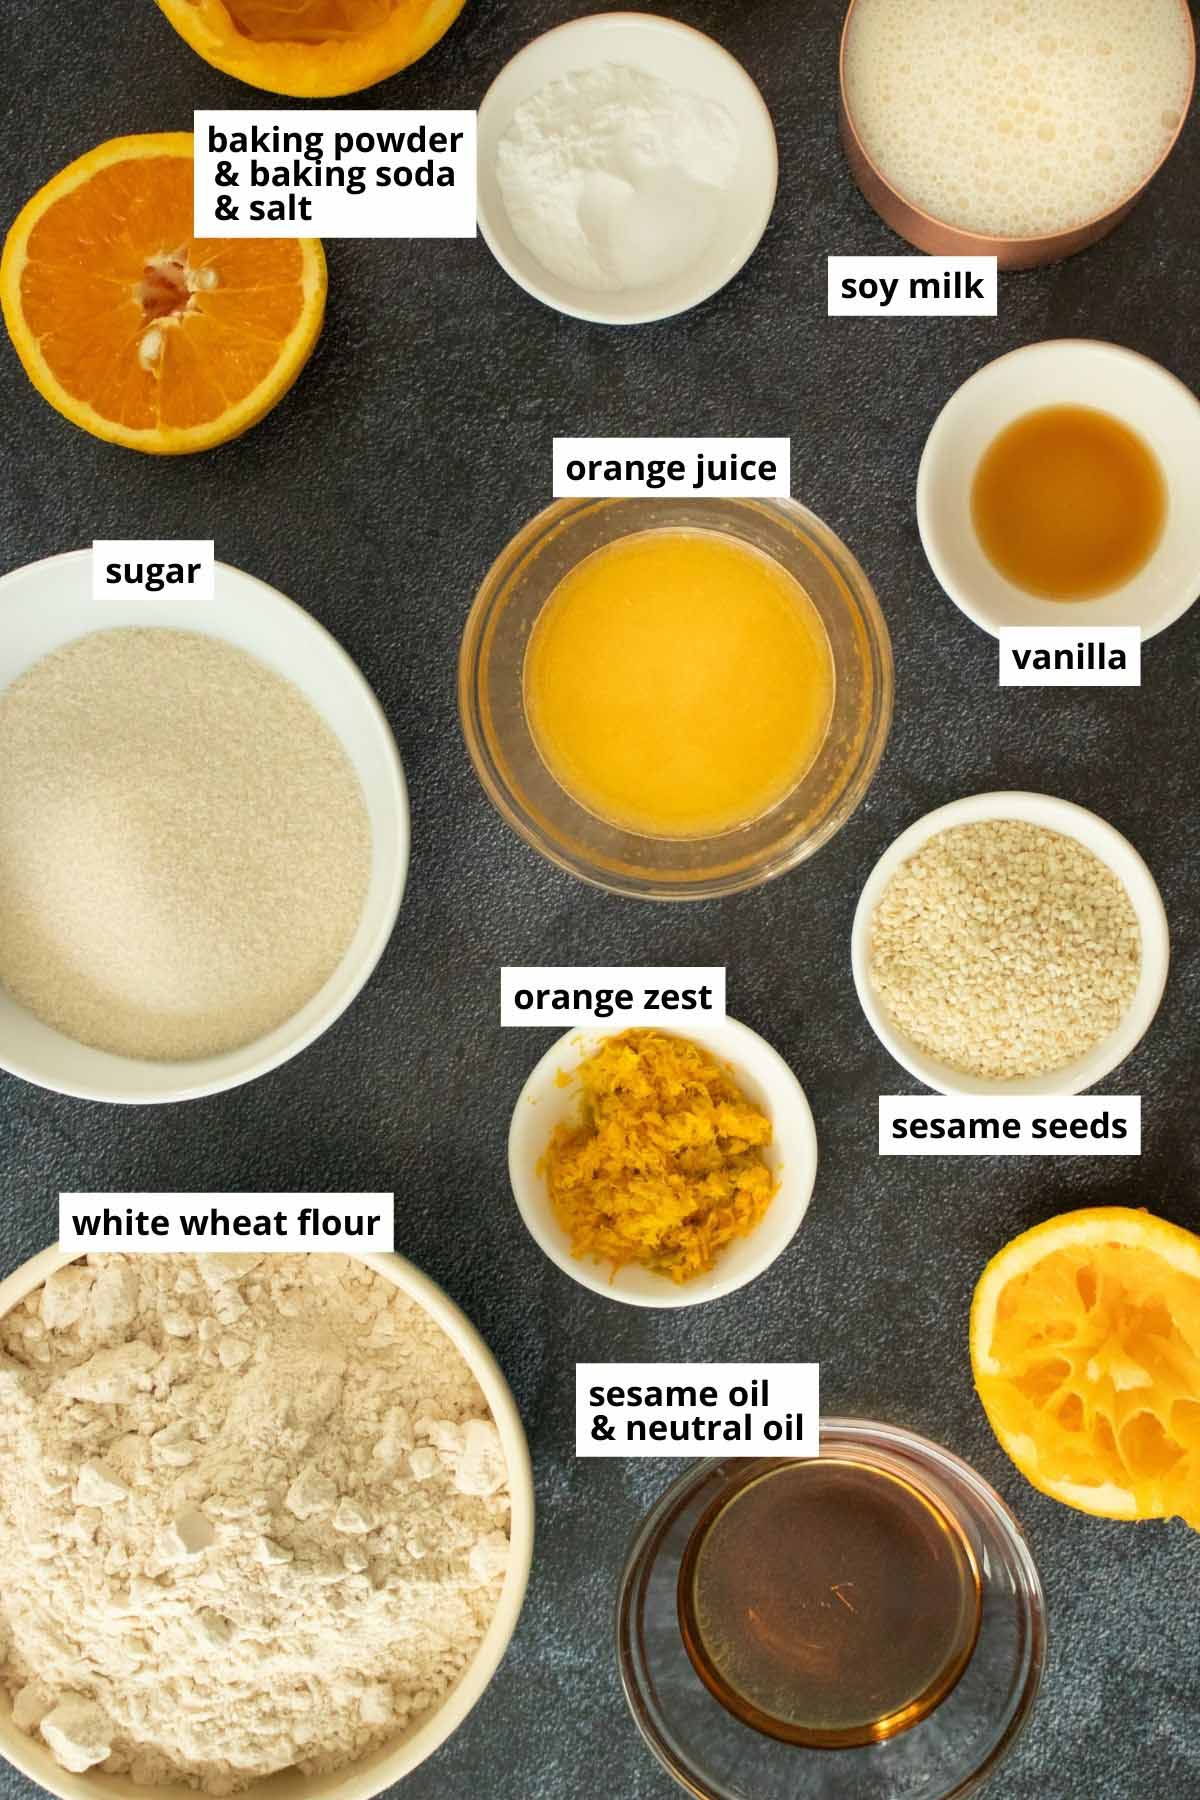 orange juice and zest, flour, sugar, and other muffin ingredients in bowls on a dark tabletop